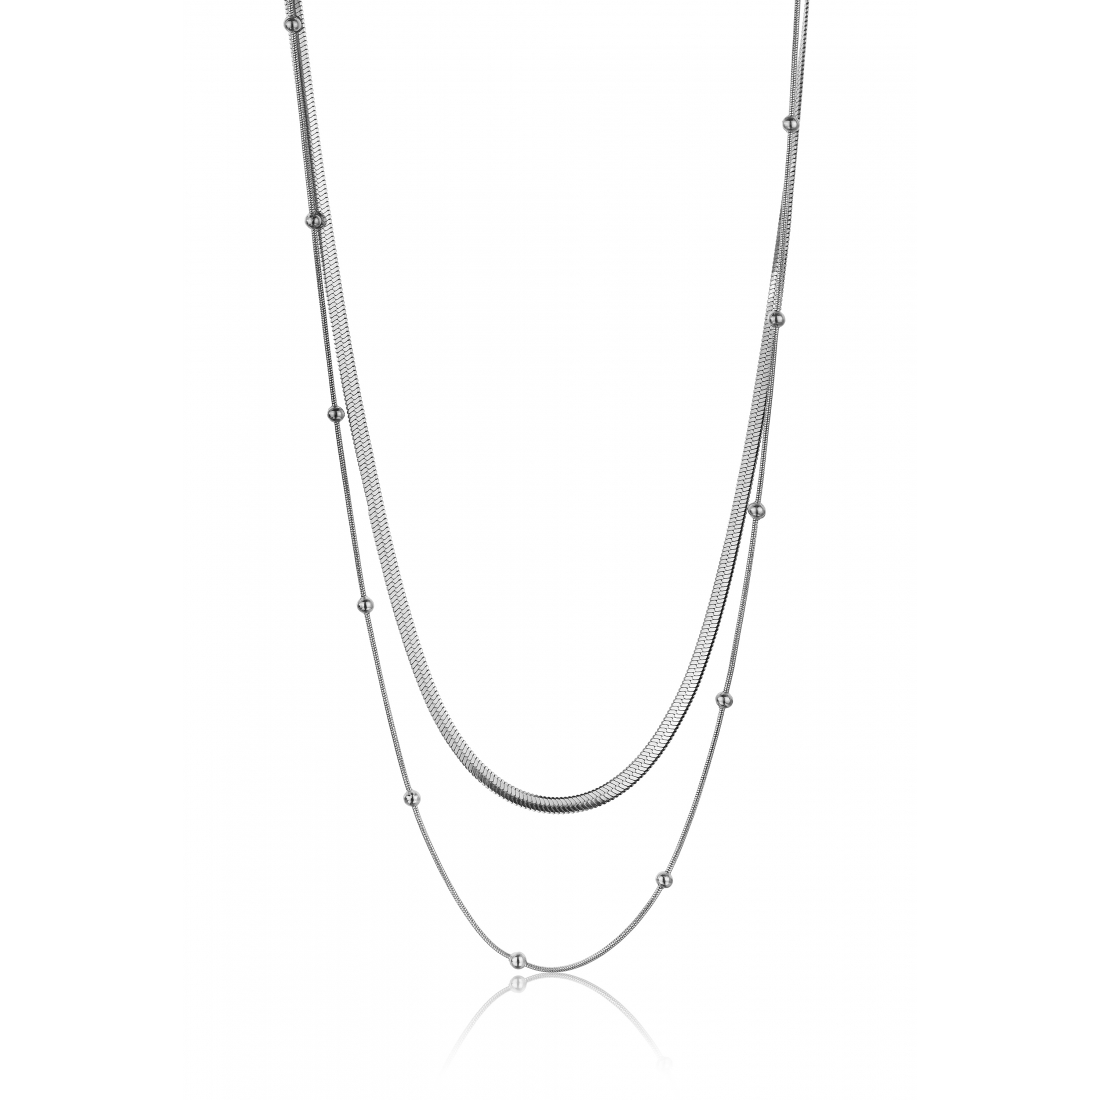 Women's 'Adelyn' Necklace